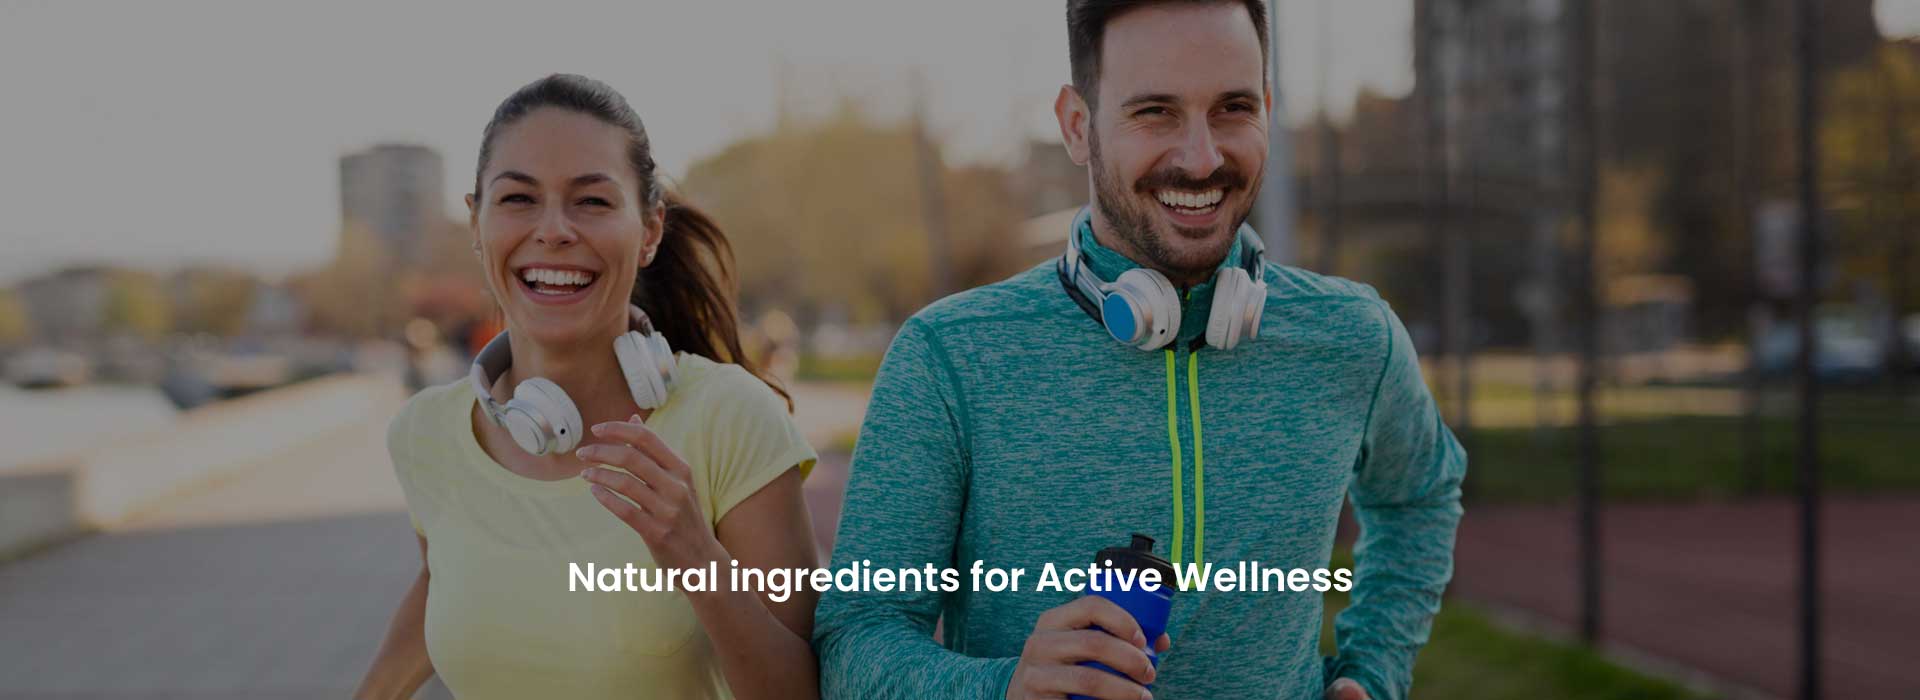 Natural ingredients for Active Wellness